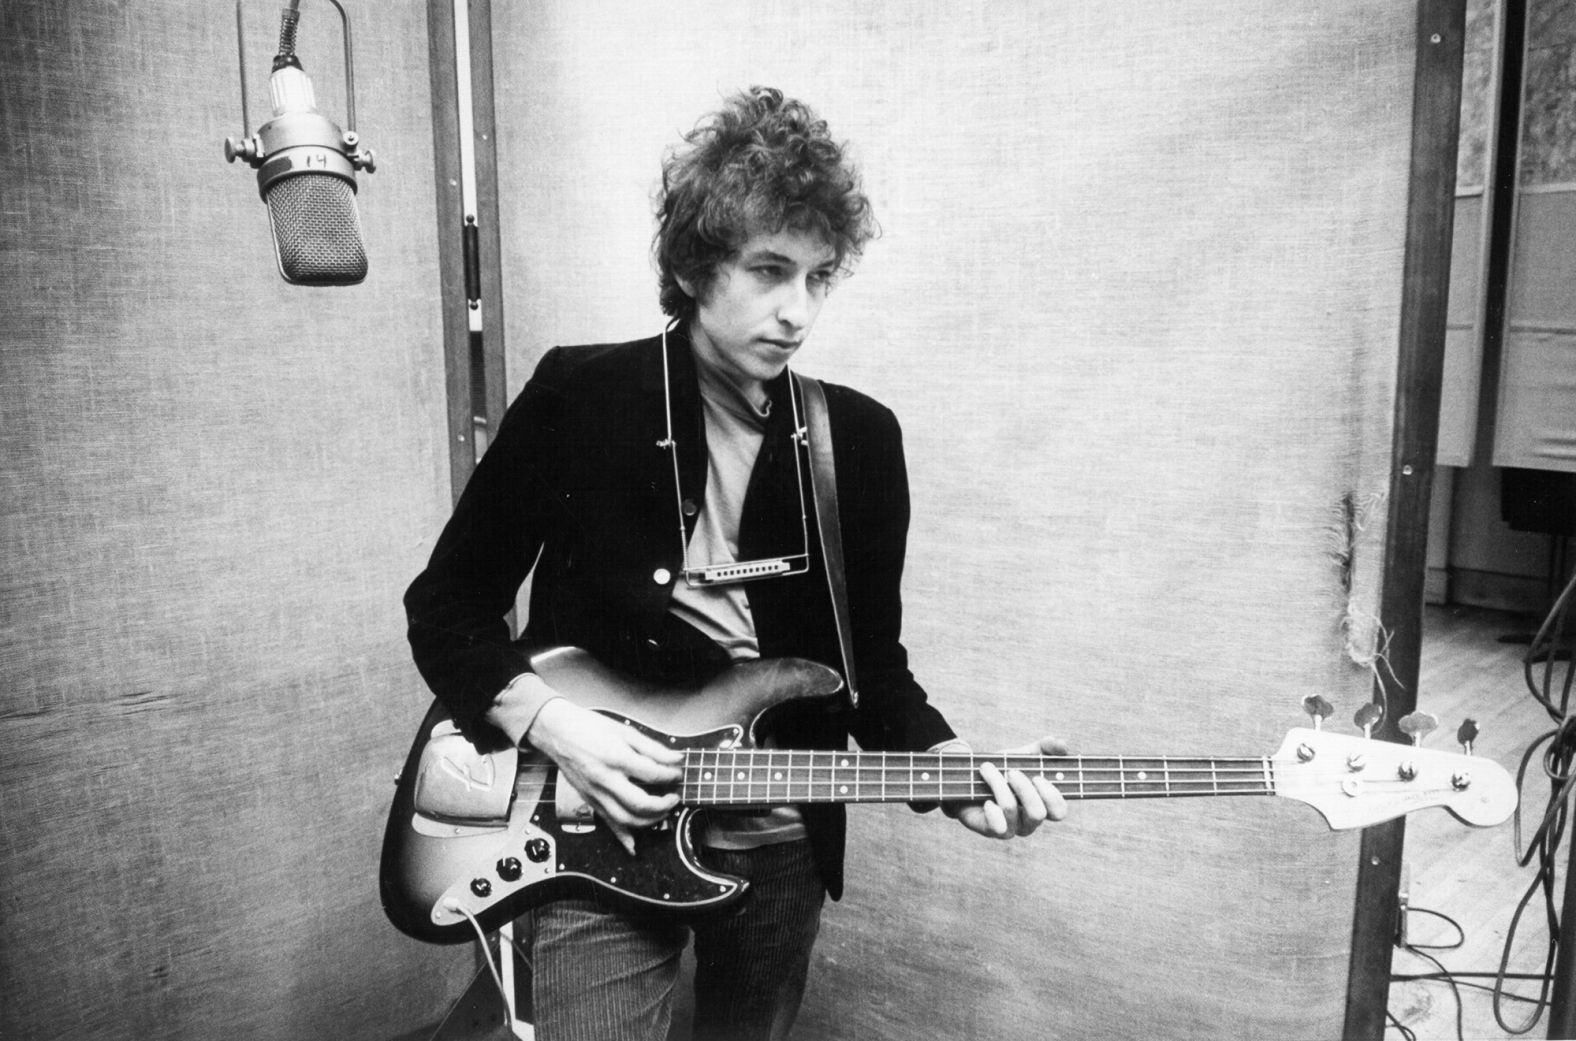 Dylan records his album "Bringing It All Back Home" in 1965. The album was a mix of acoustic and electric guitar. Dylan's move to electric was controversial at the time. Some fans wanted him to stick with the acoustic music they were used to hearing from him.